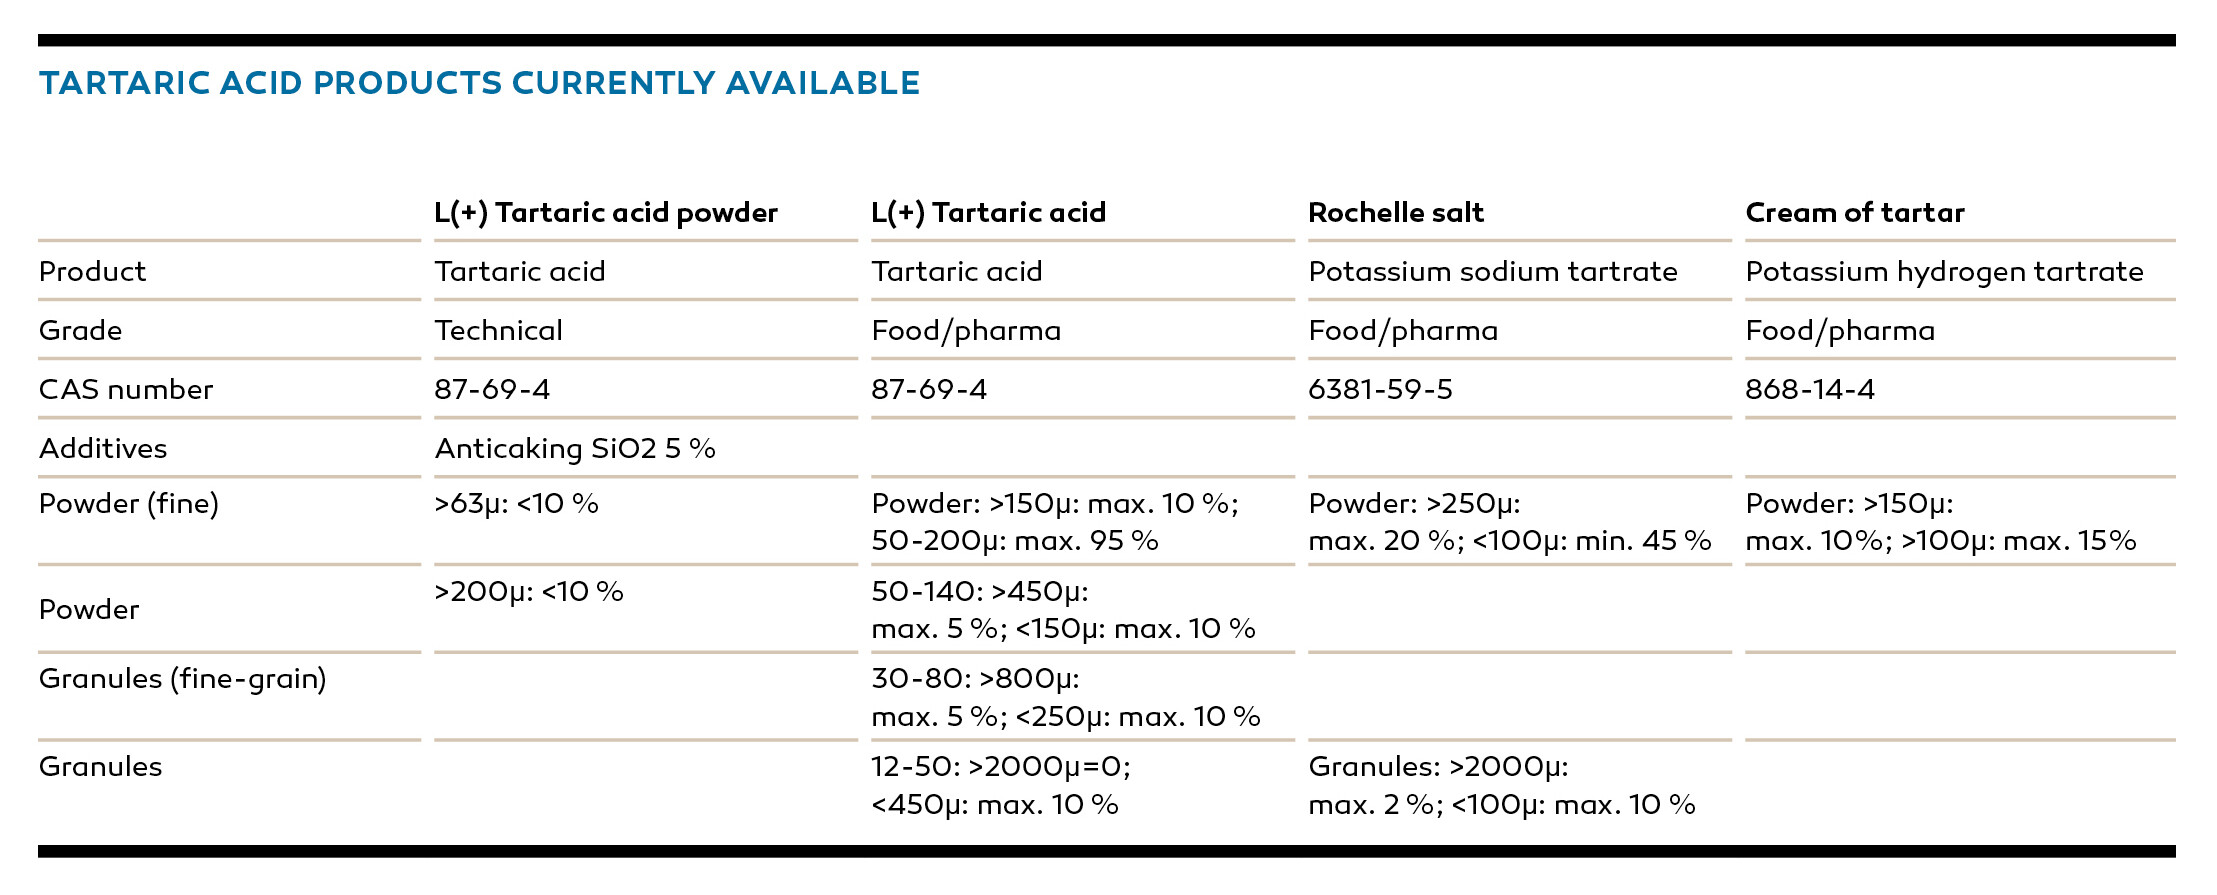 Tartaric acid products currently available